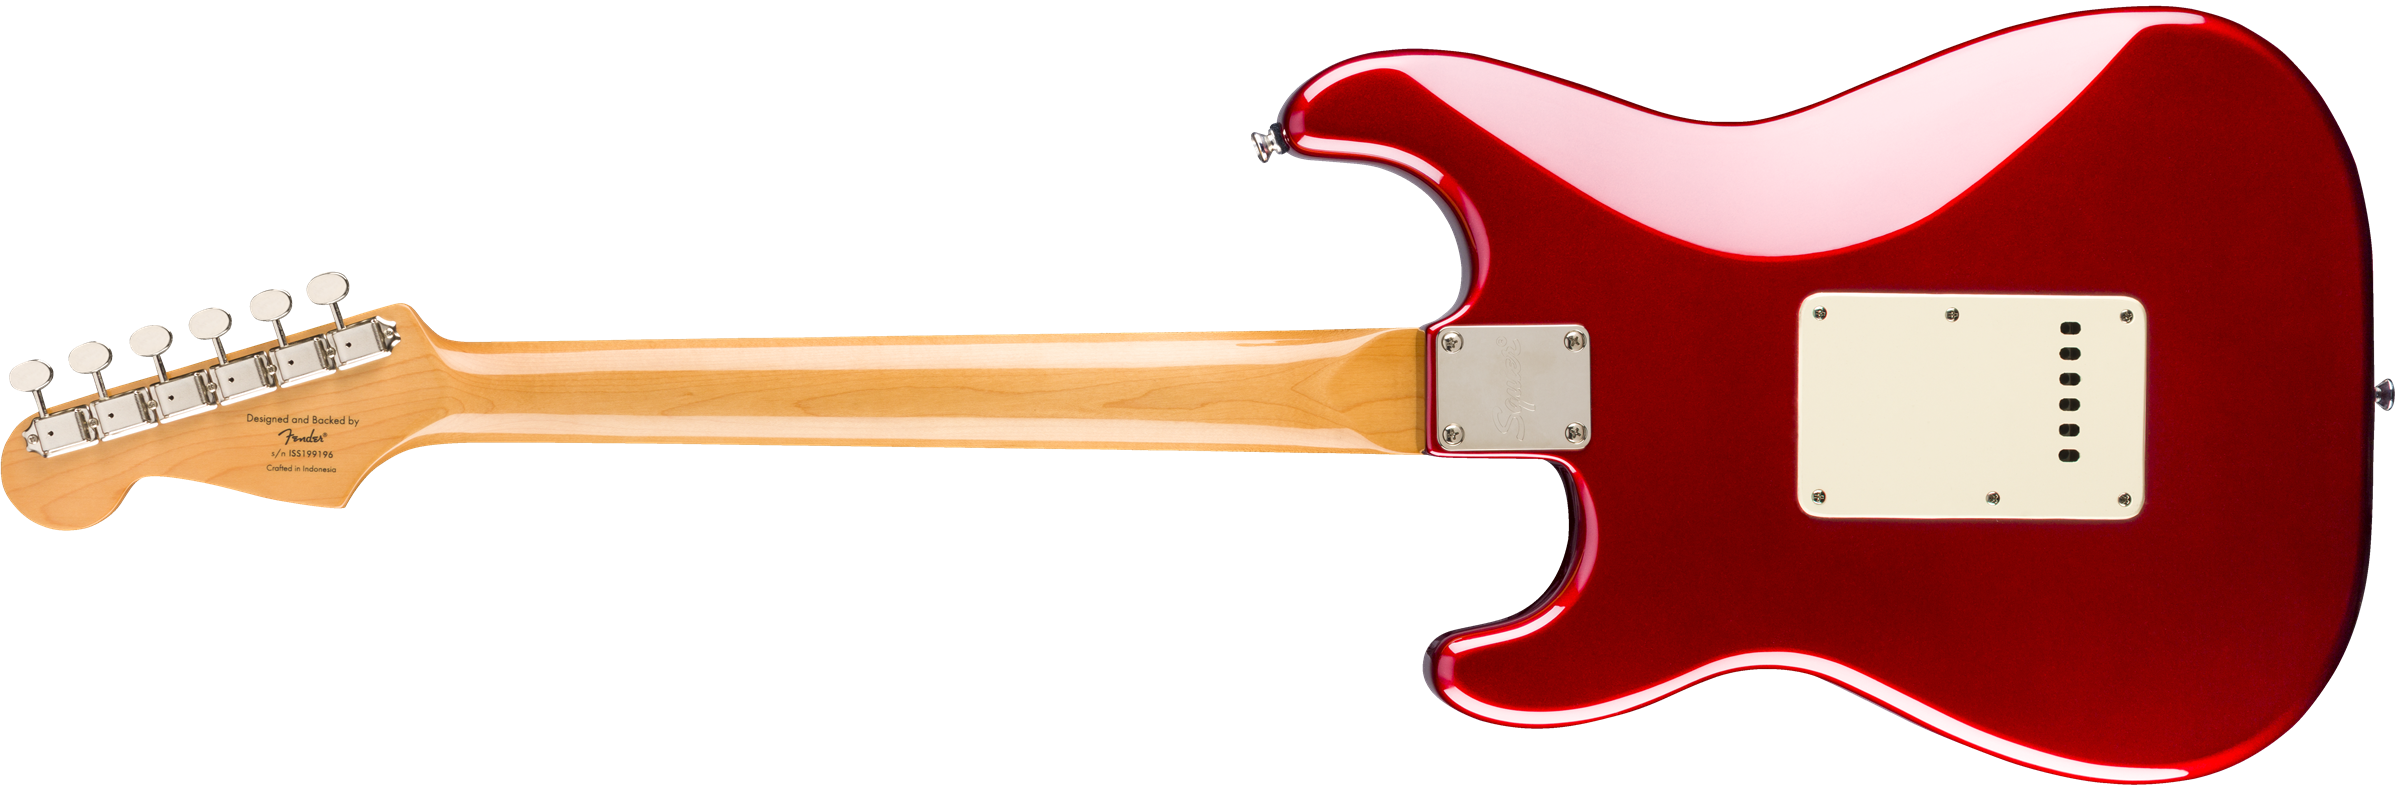 Squier Strat '60s Classic Vibe 2019 Lau 2019 - Candy Apple Red - E-Gitarre in Str-Form - Variation 1